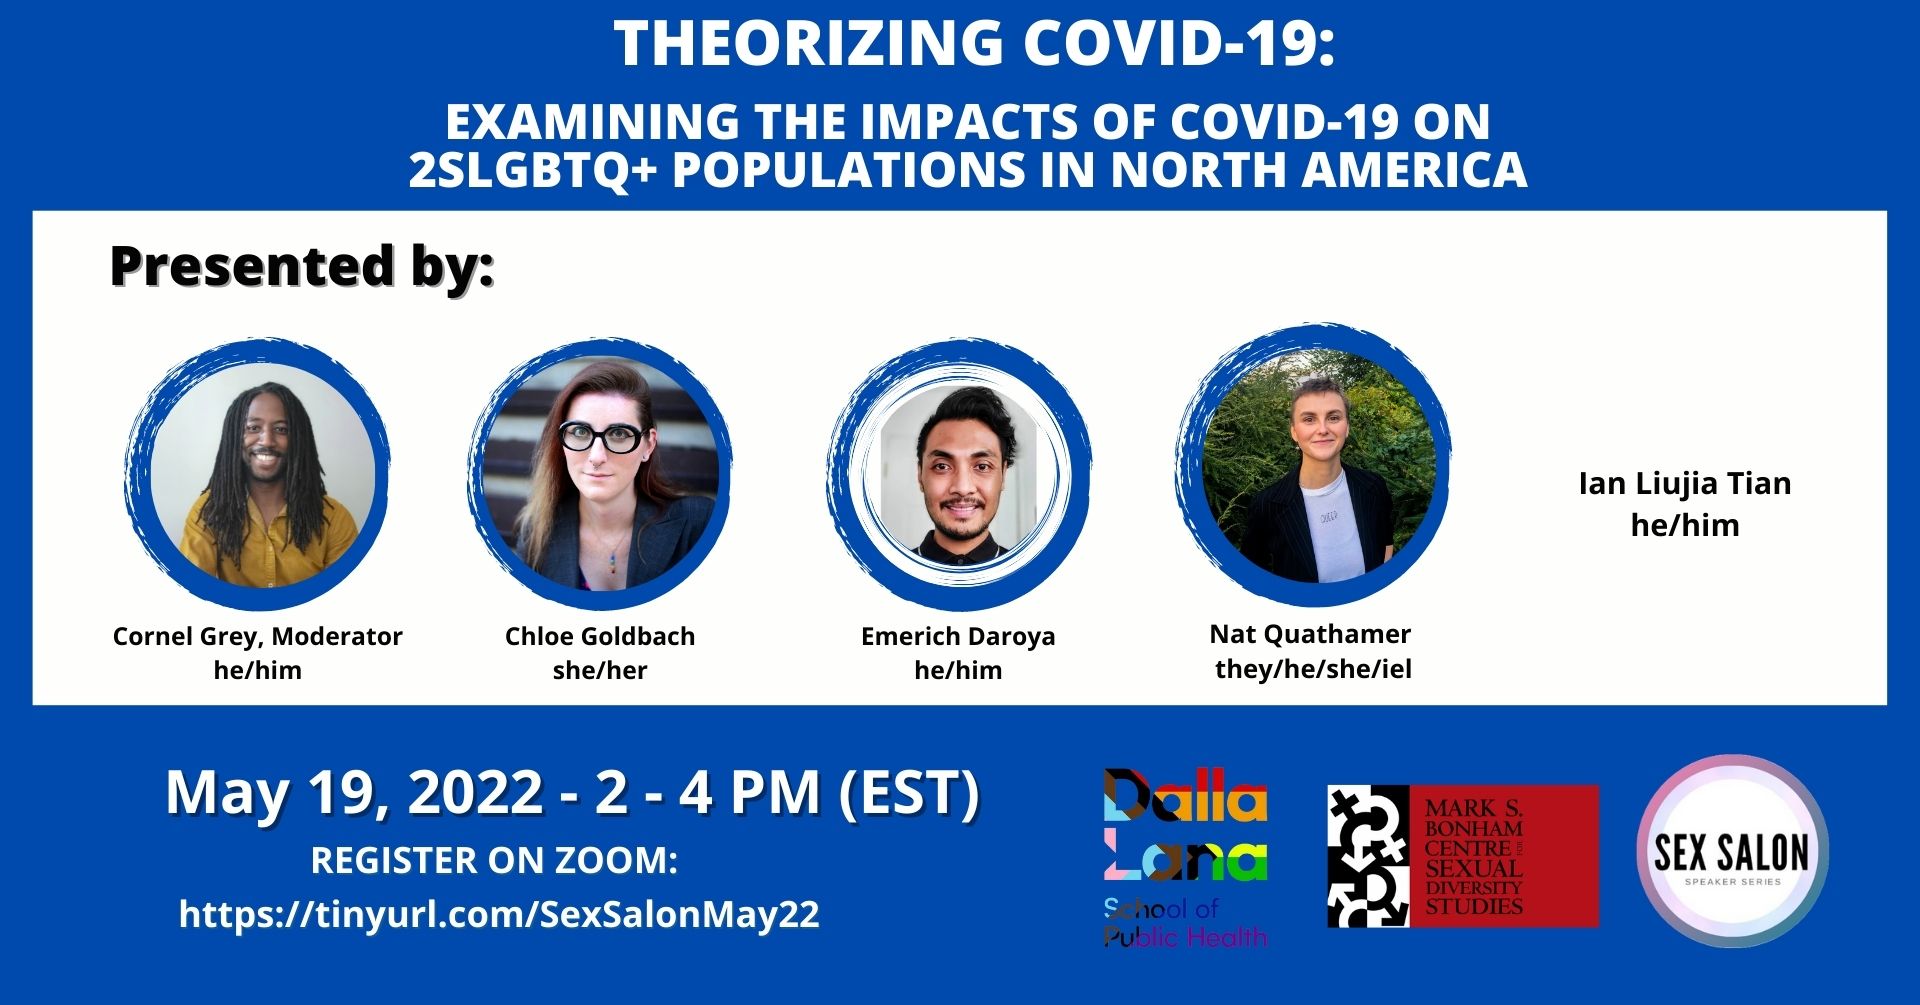 May Sex Salon: Theorizing COVID-19: Examining the Impacts of COVID-19 on 2SLGBTQ+ Populations in North America”.